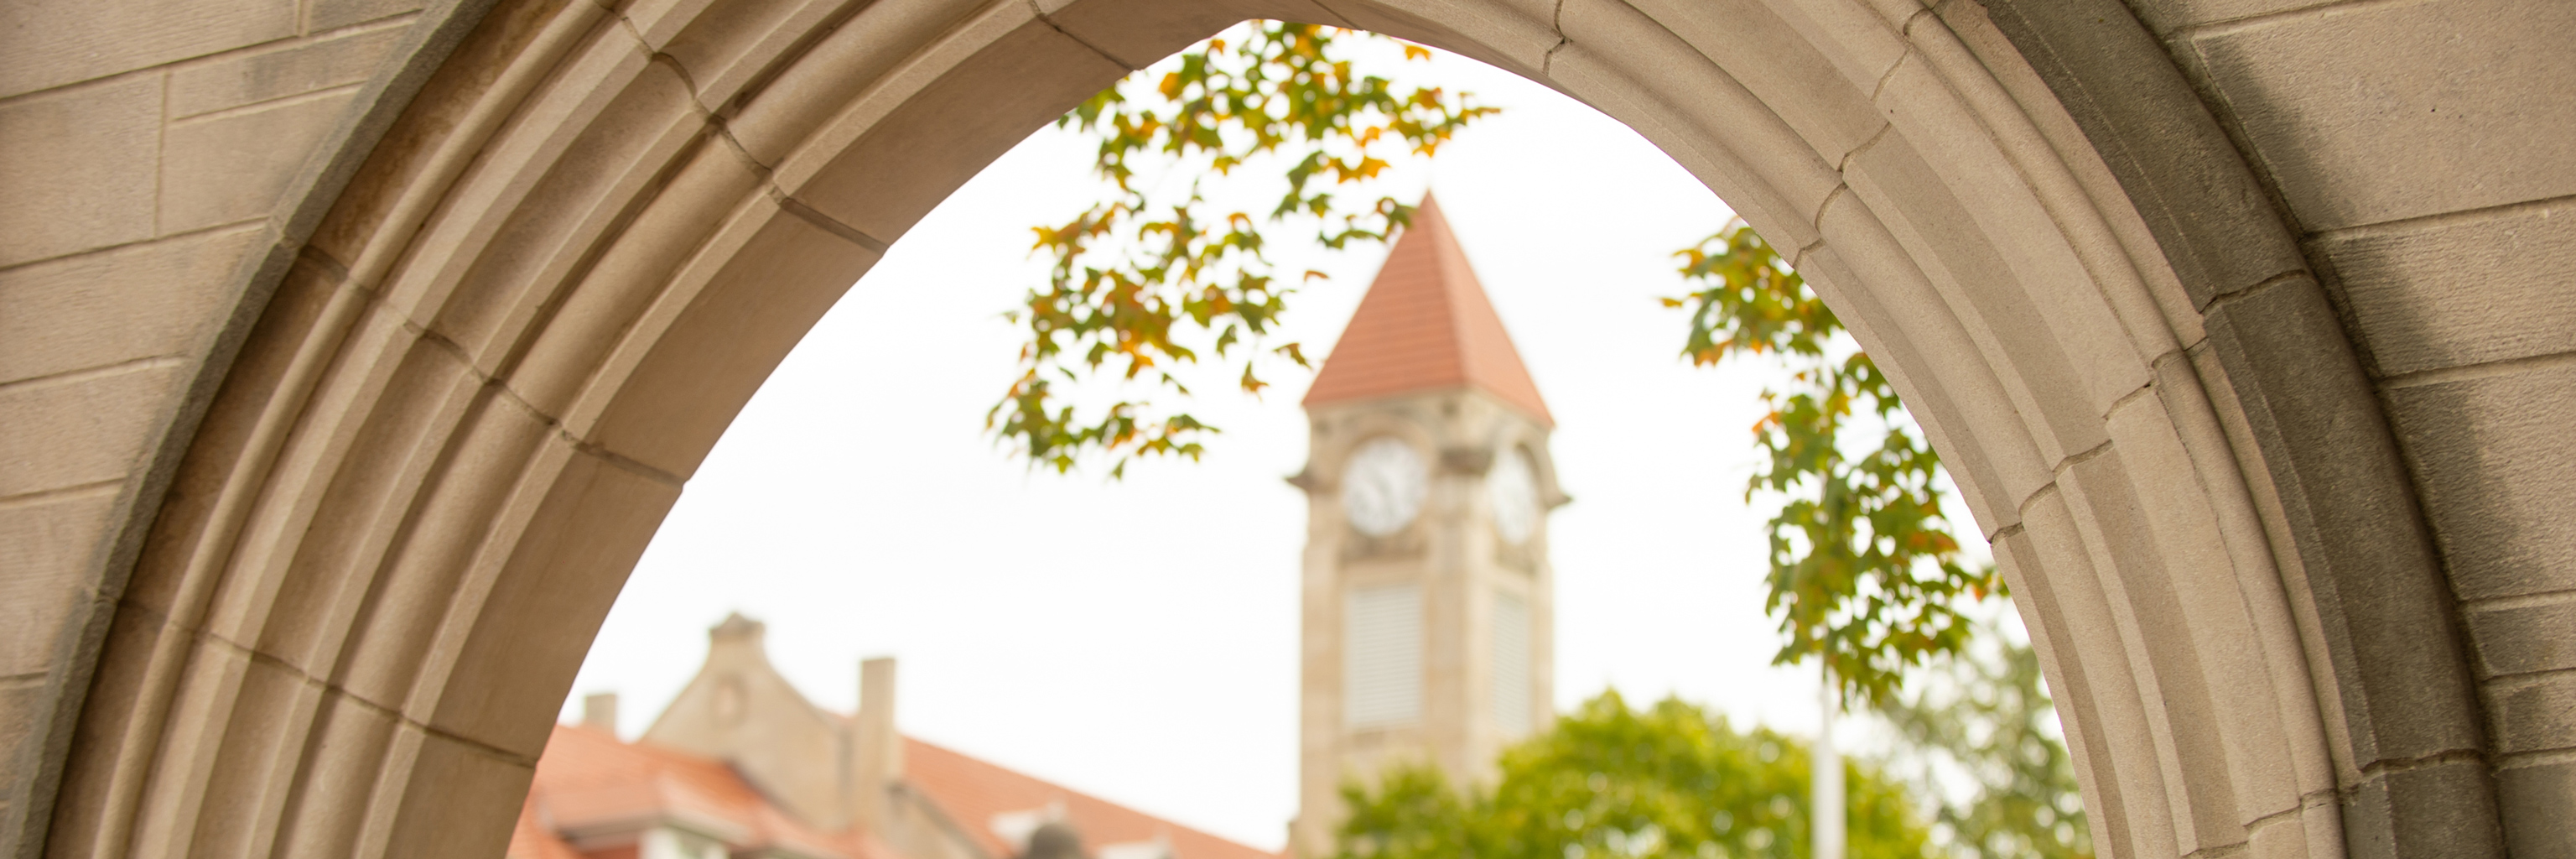 A view of the Student Building bell tower through the IU Sample Gates.